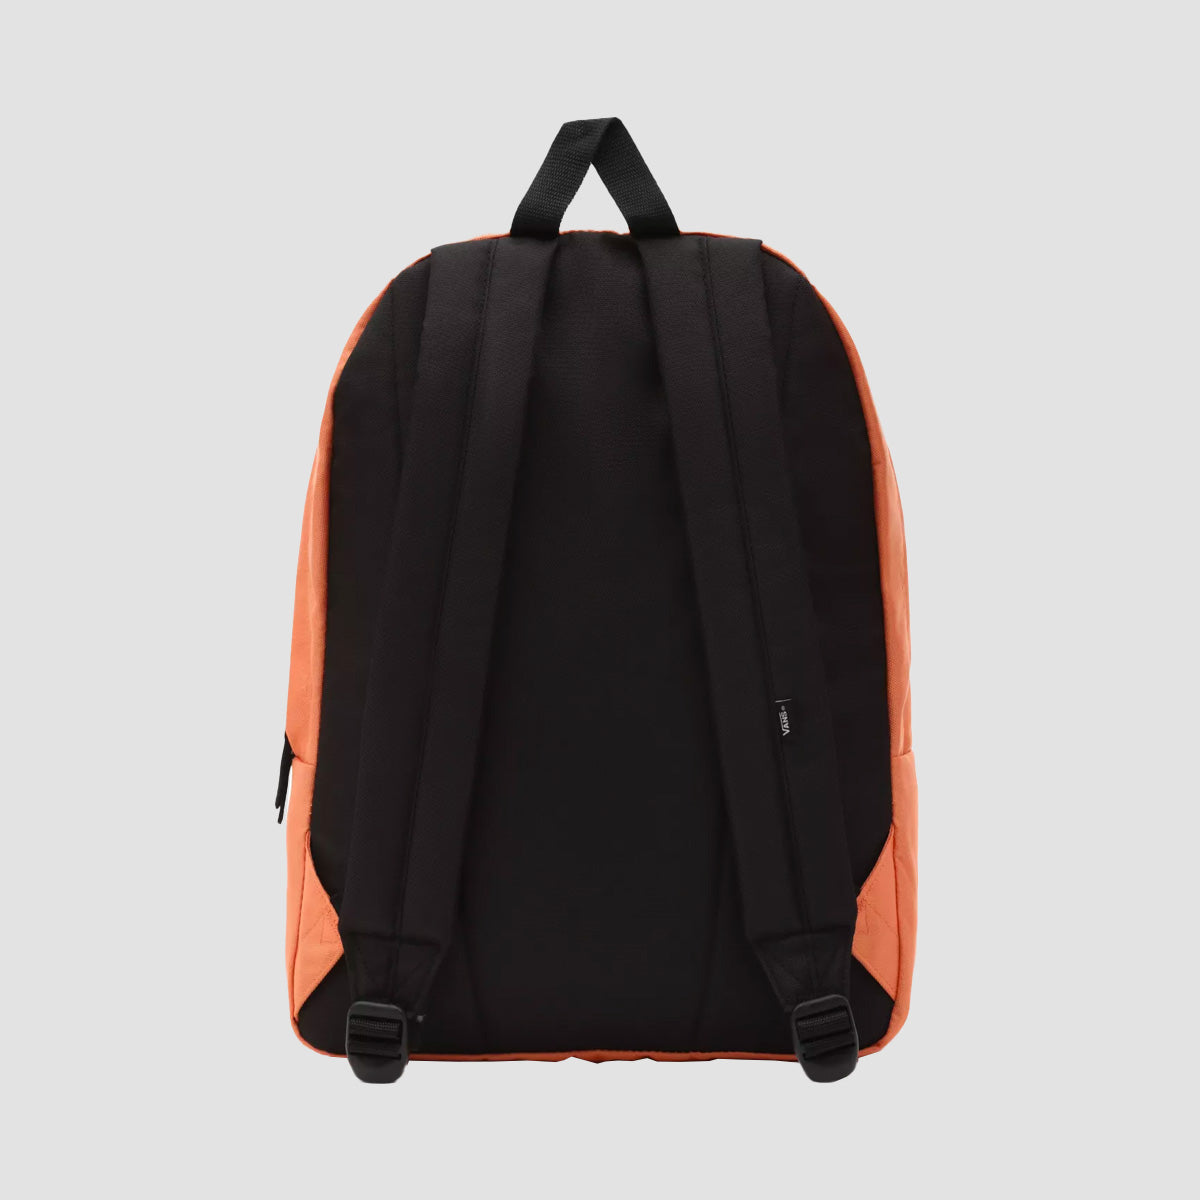 Vans Realm 22L Backpack Sun Baked - Womens